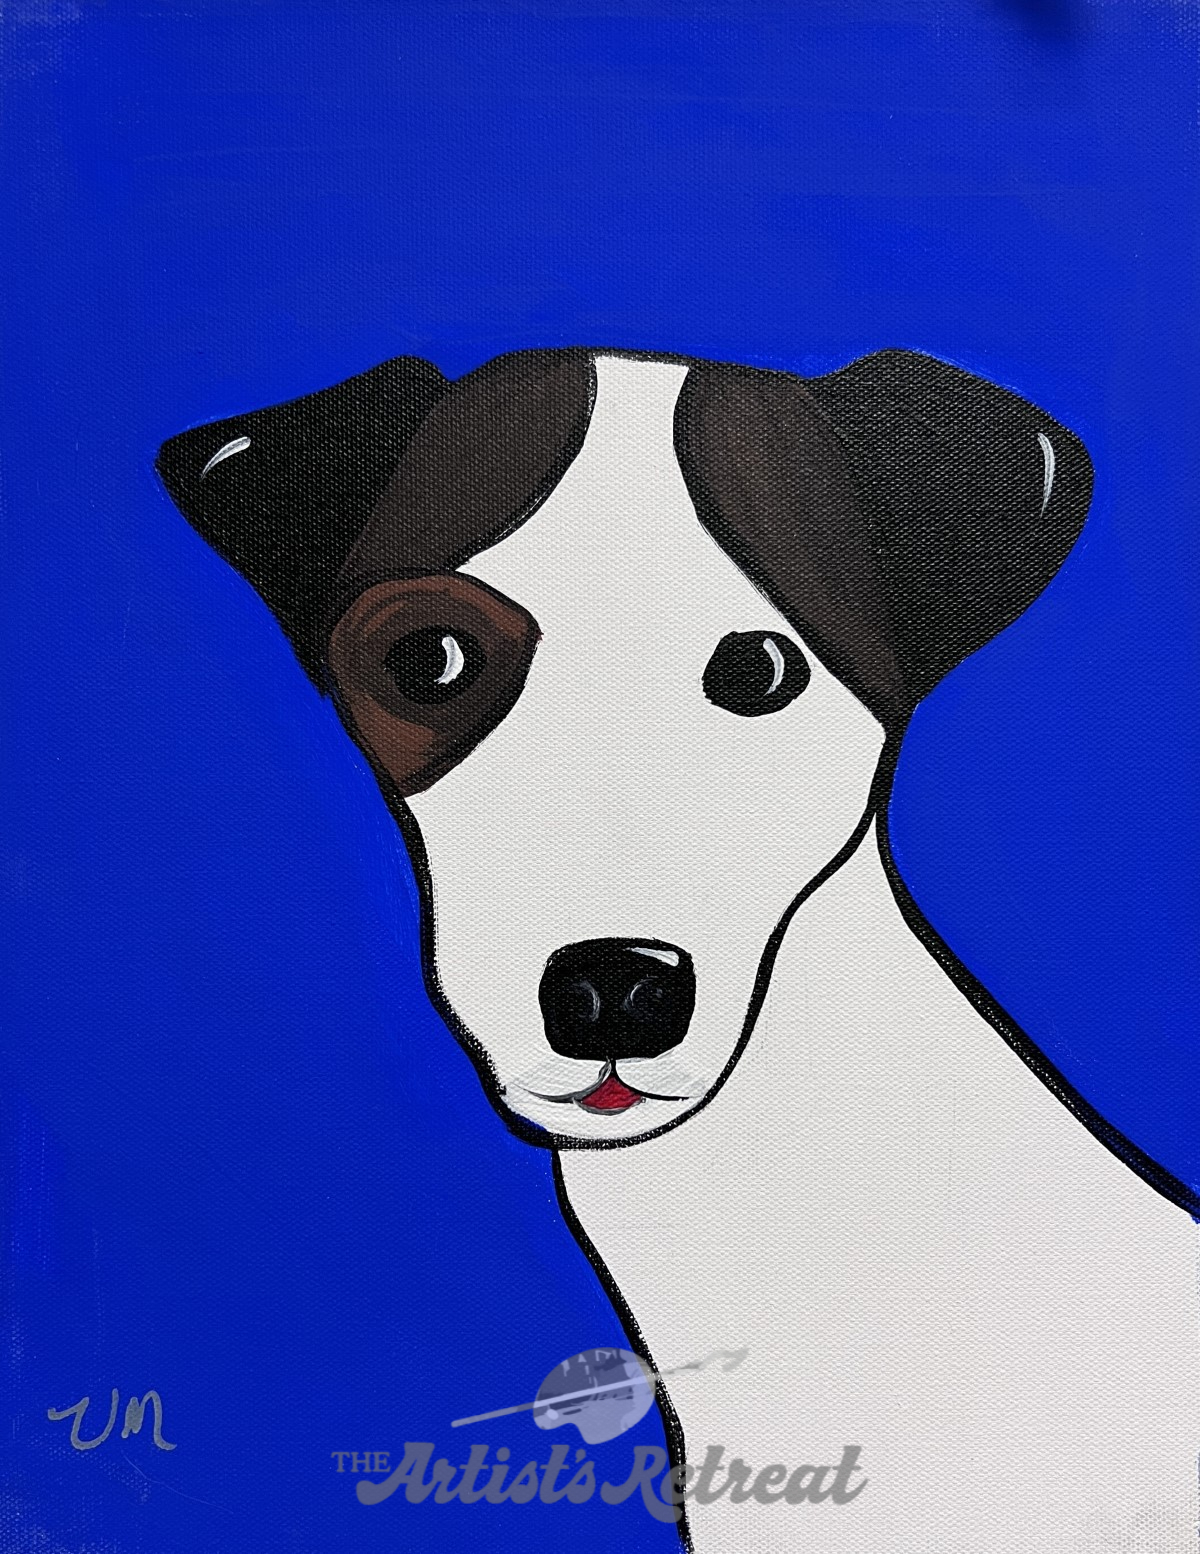 Jack Russell - The Artist's Retreat